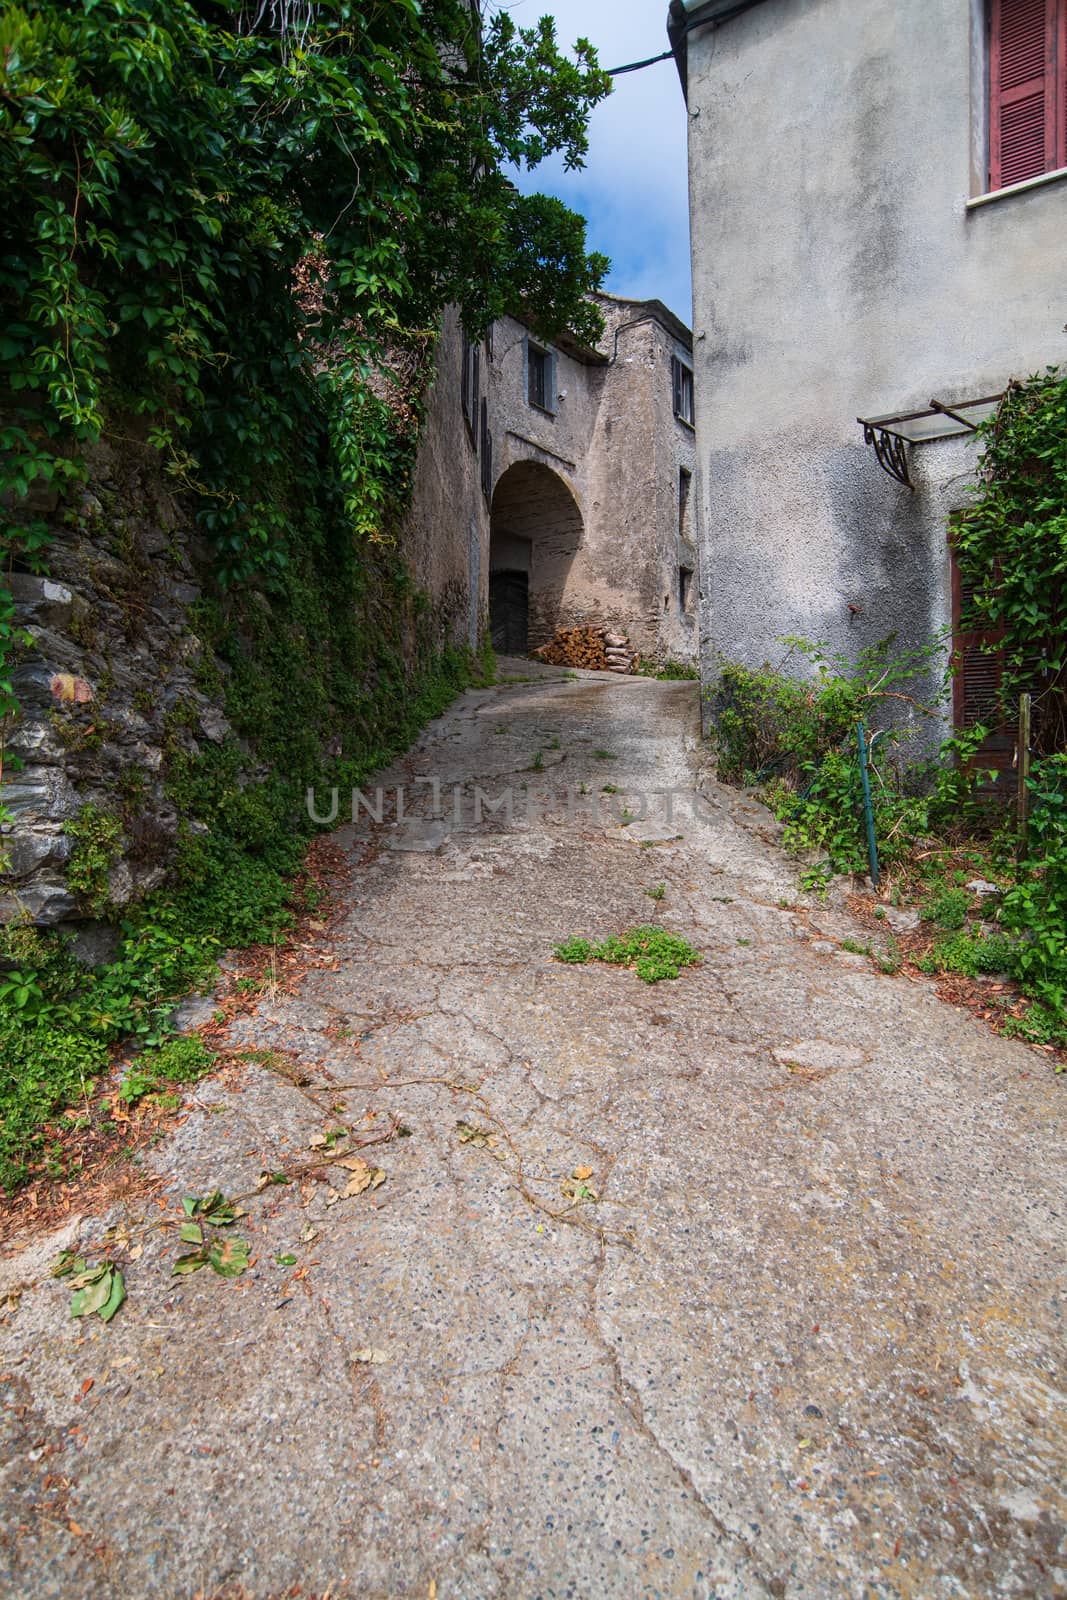 Alley in Costarician village by Youri